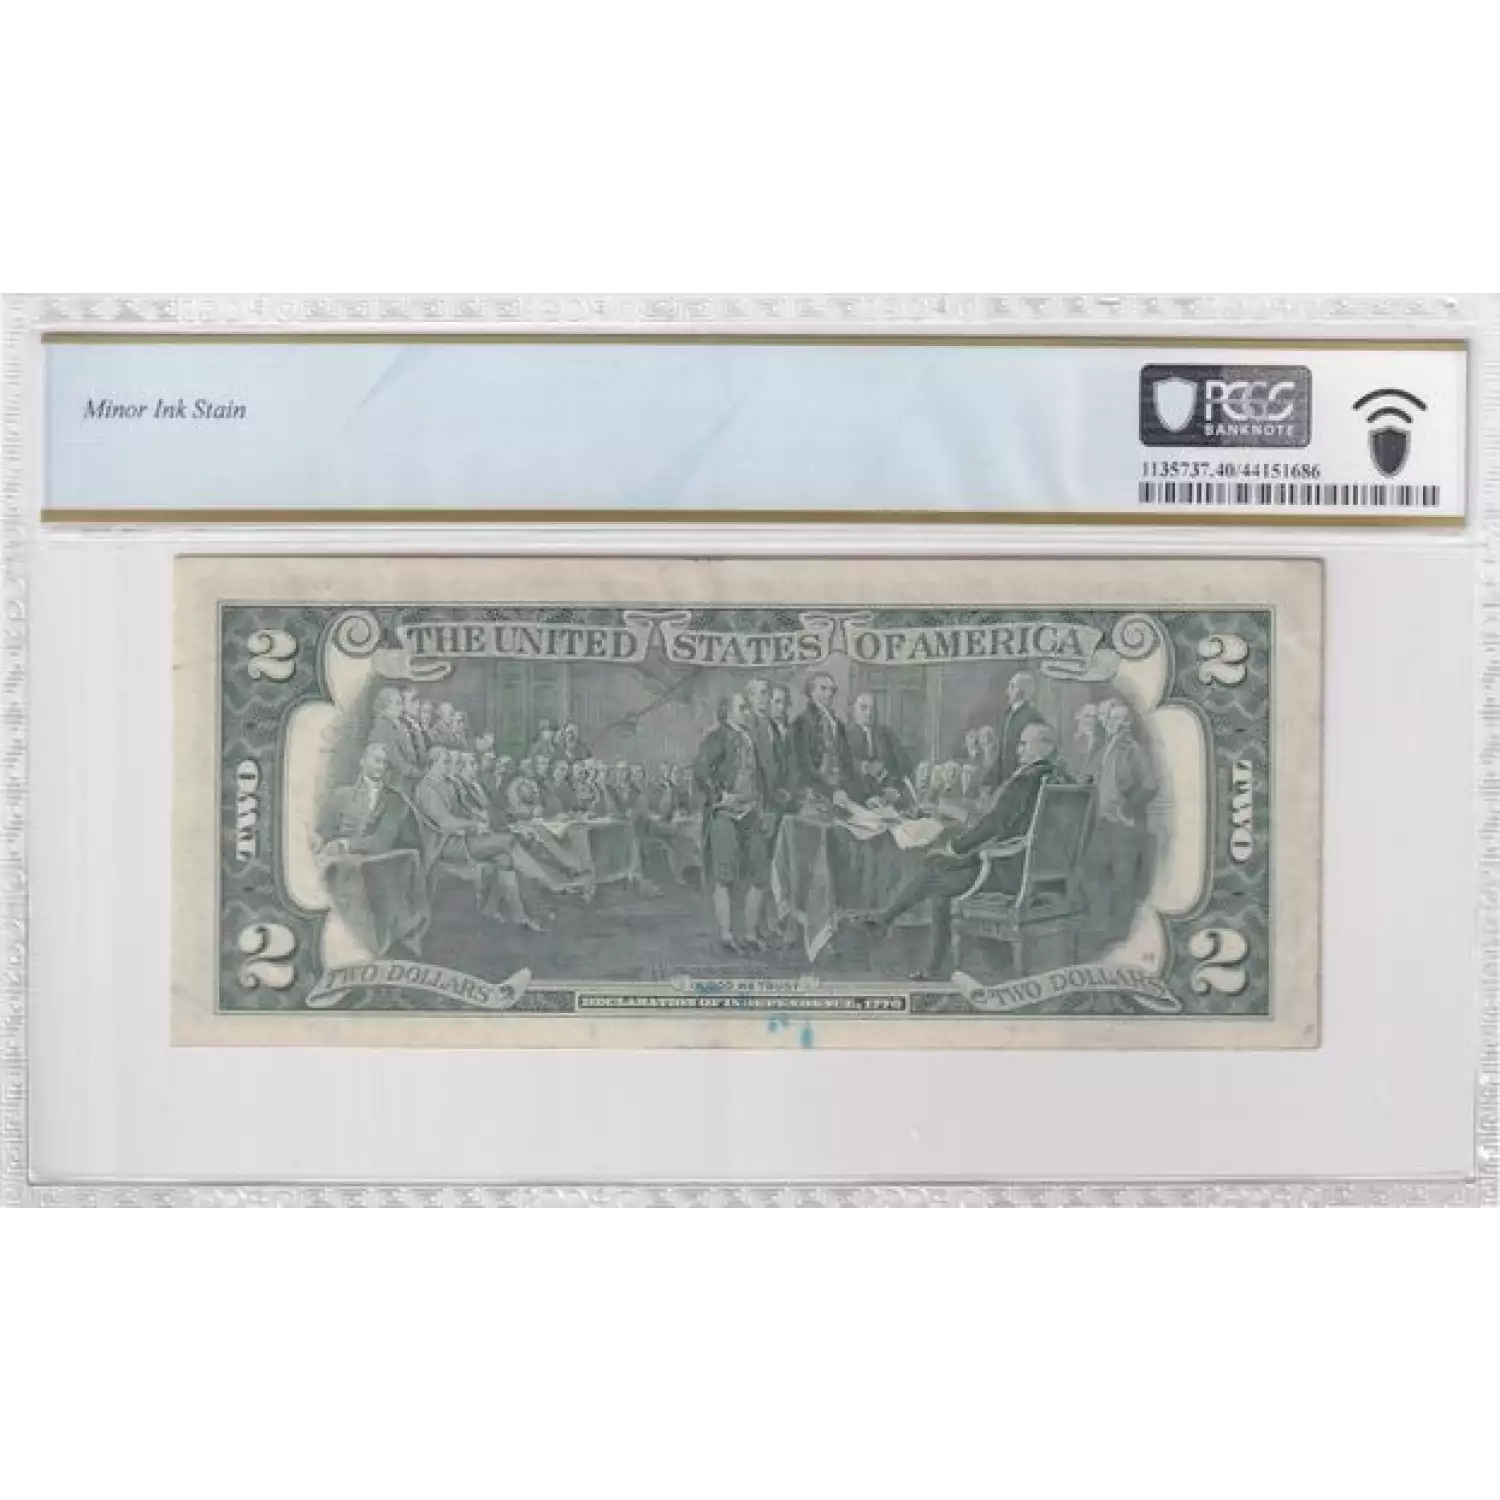 $2 1976 Green seal Small Size $2 Federal Reserve Notes 1935-B (2)